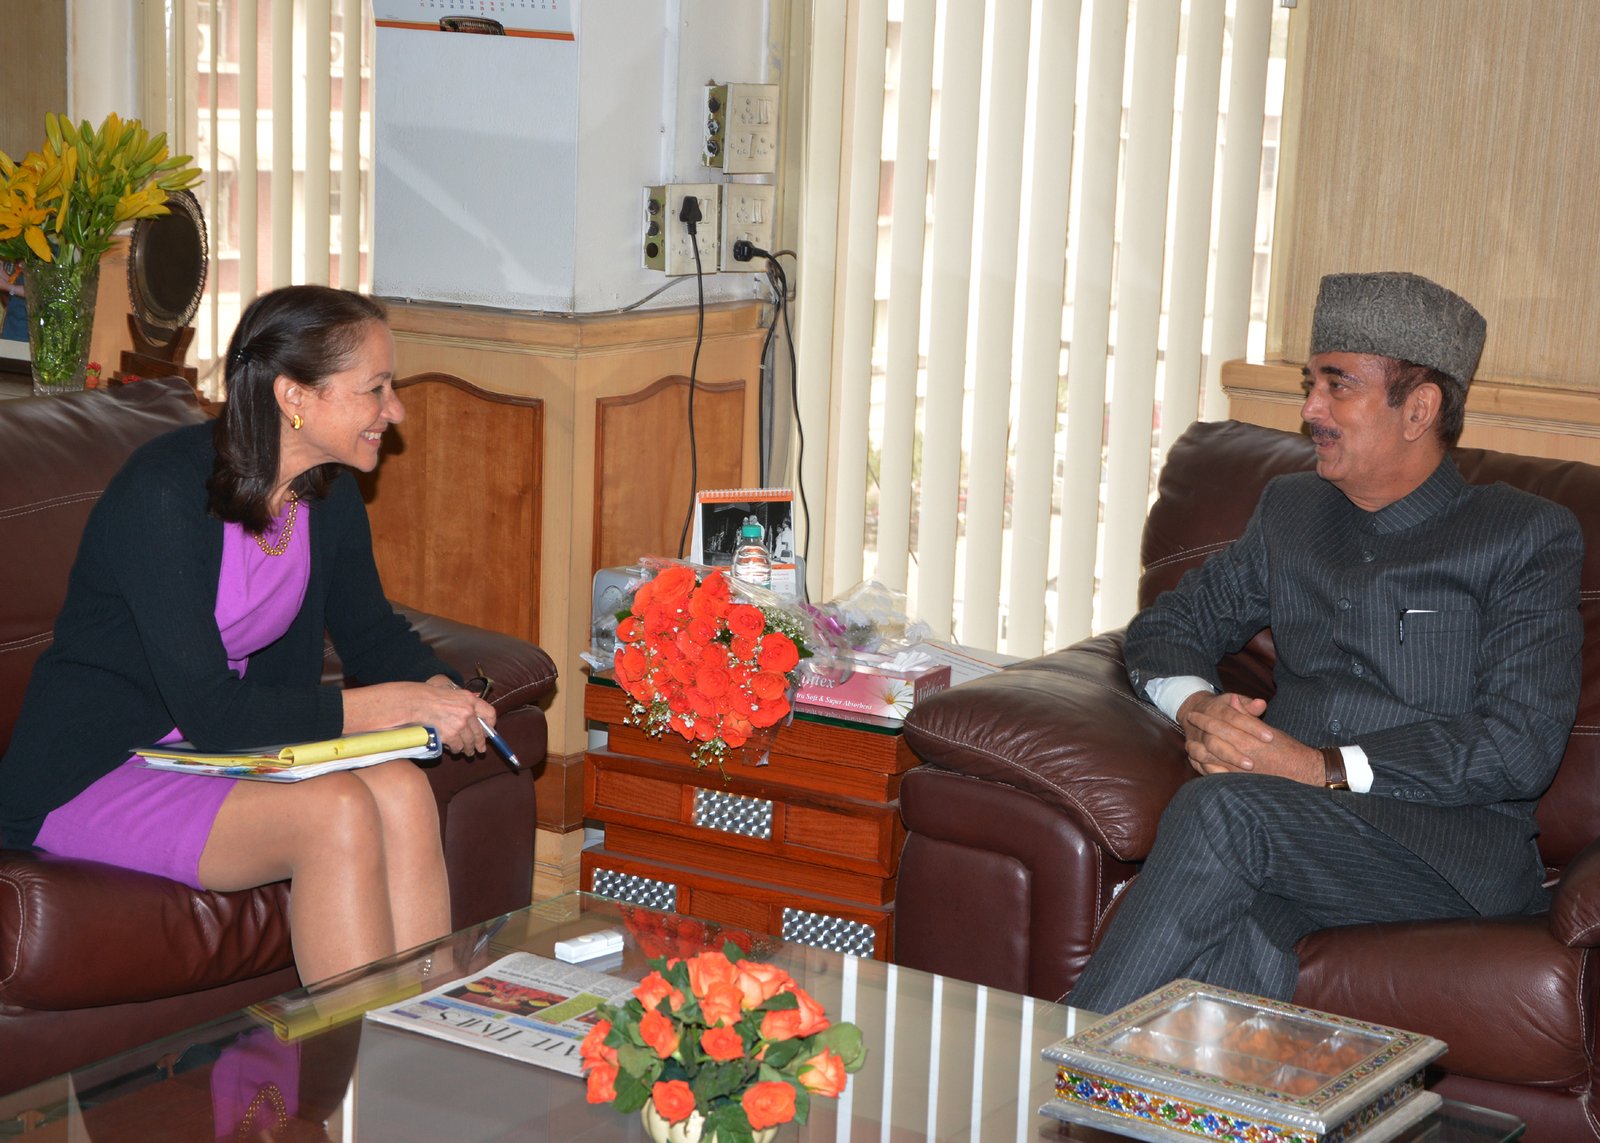 The union minister for health, Mr Ghulam Nabi Azad meeting the commissioner, U.S. Food and Drug Administration (USFDA), Ms Margaret A. Hamburg, in New Delhi on February 10, 2014.